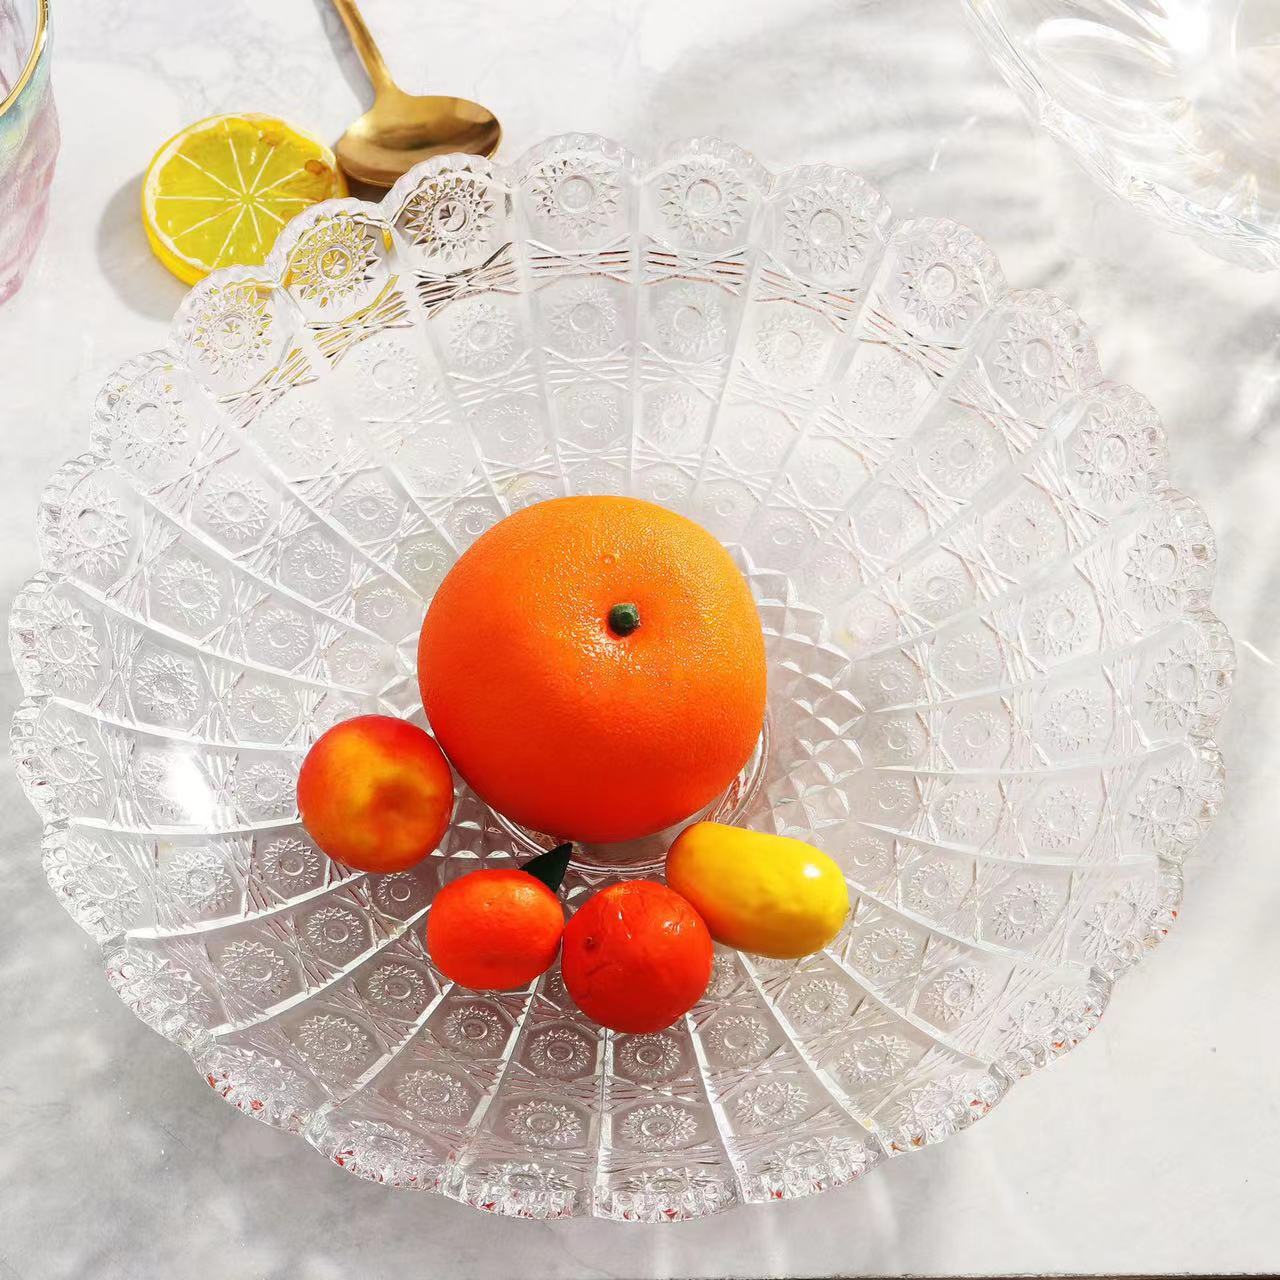 Wholesale Cutlery Salad French Fries Dessert Waffle Egg Waffle Clear Ceramic Bowl Glass Dish03